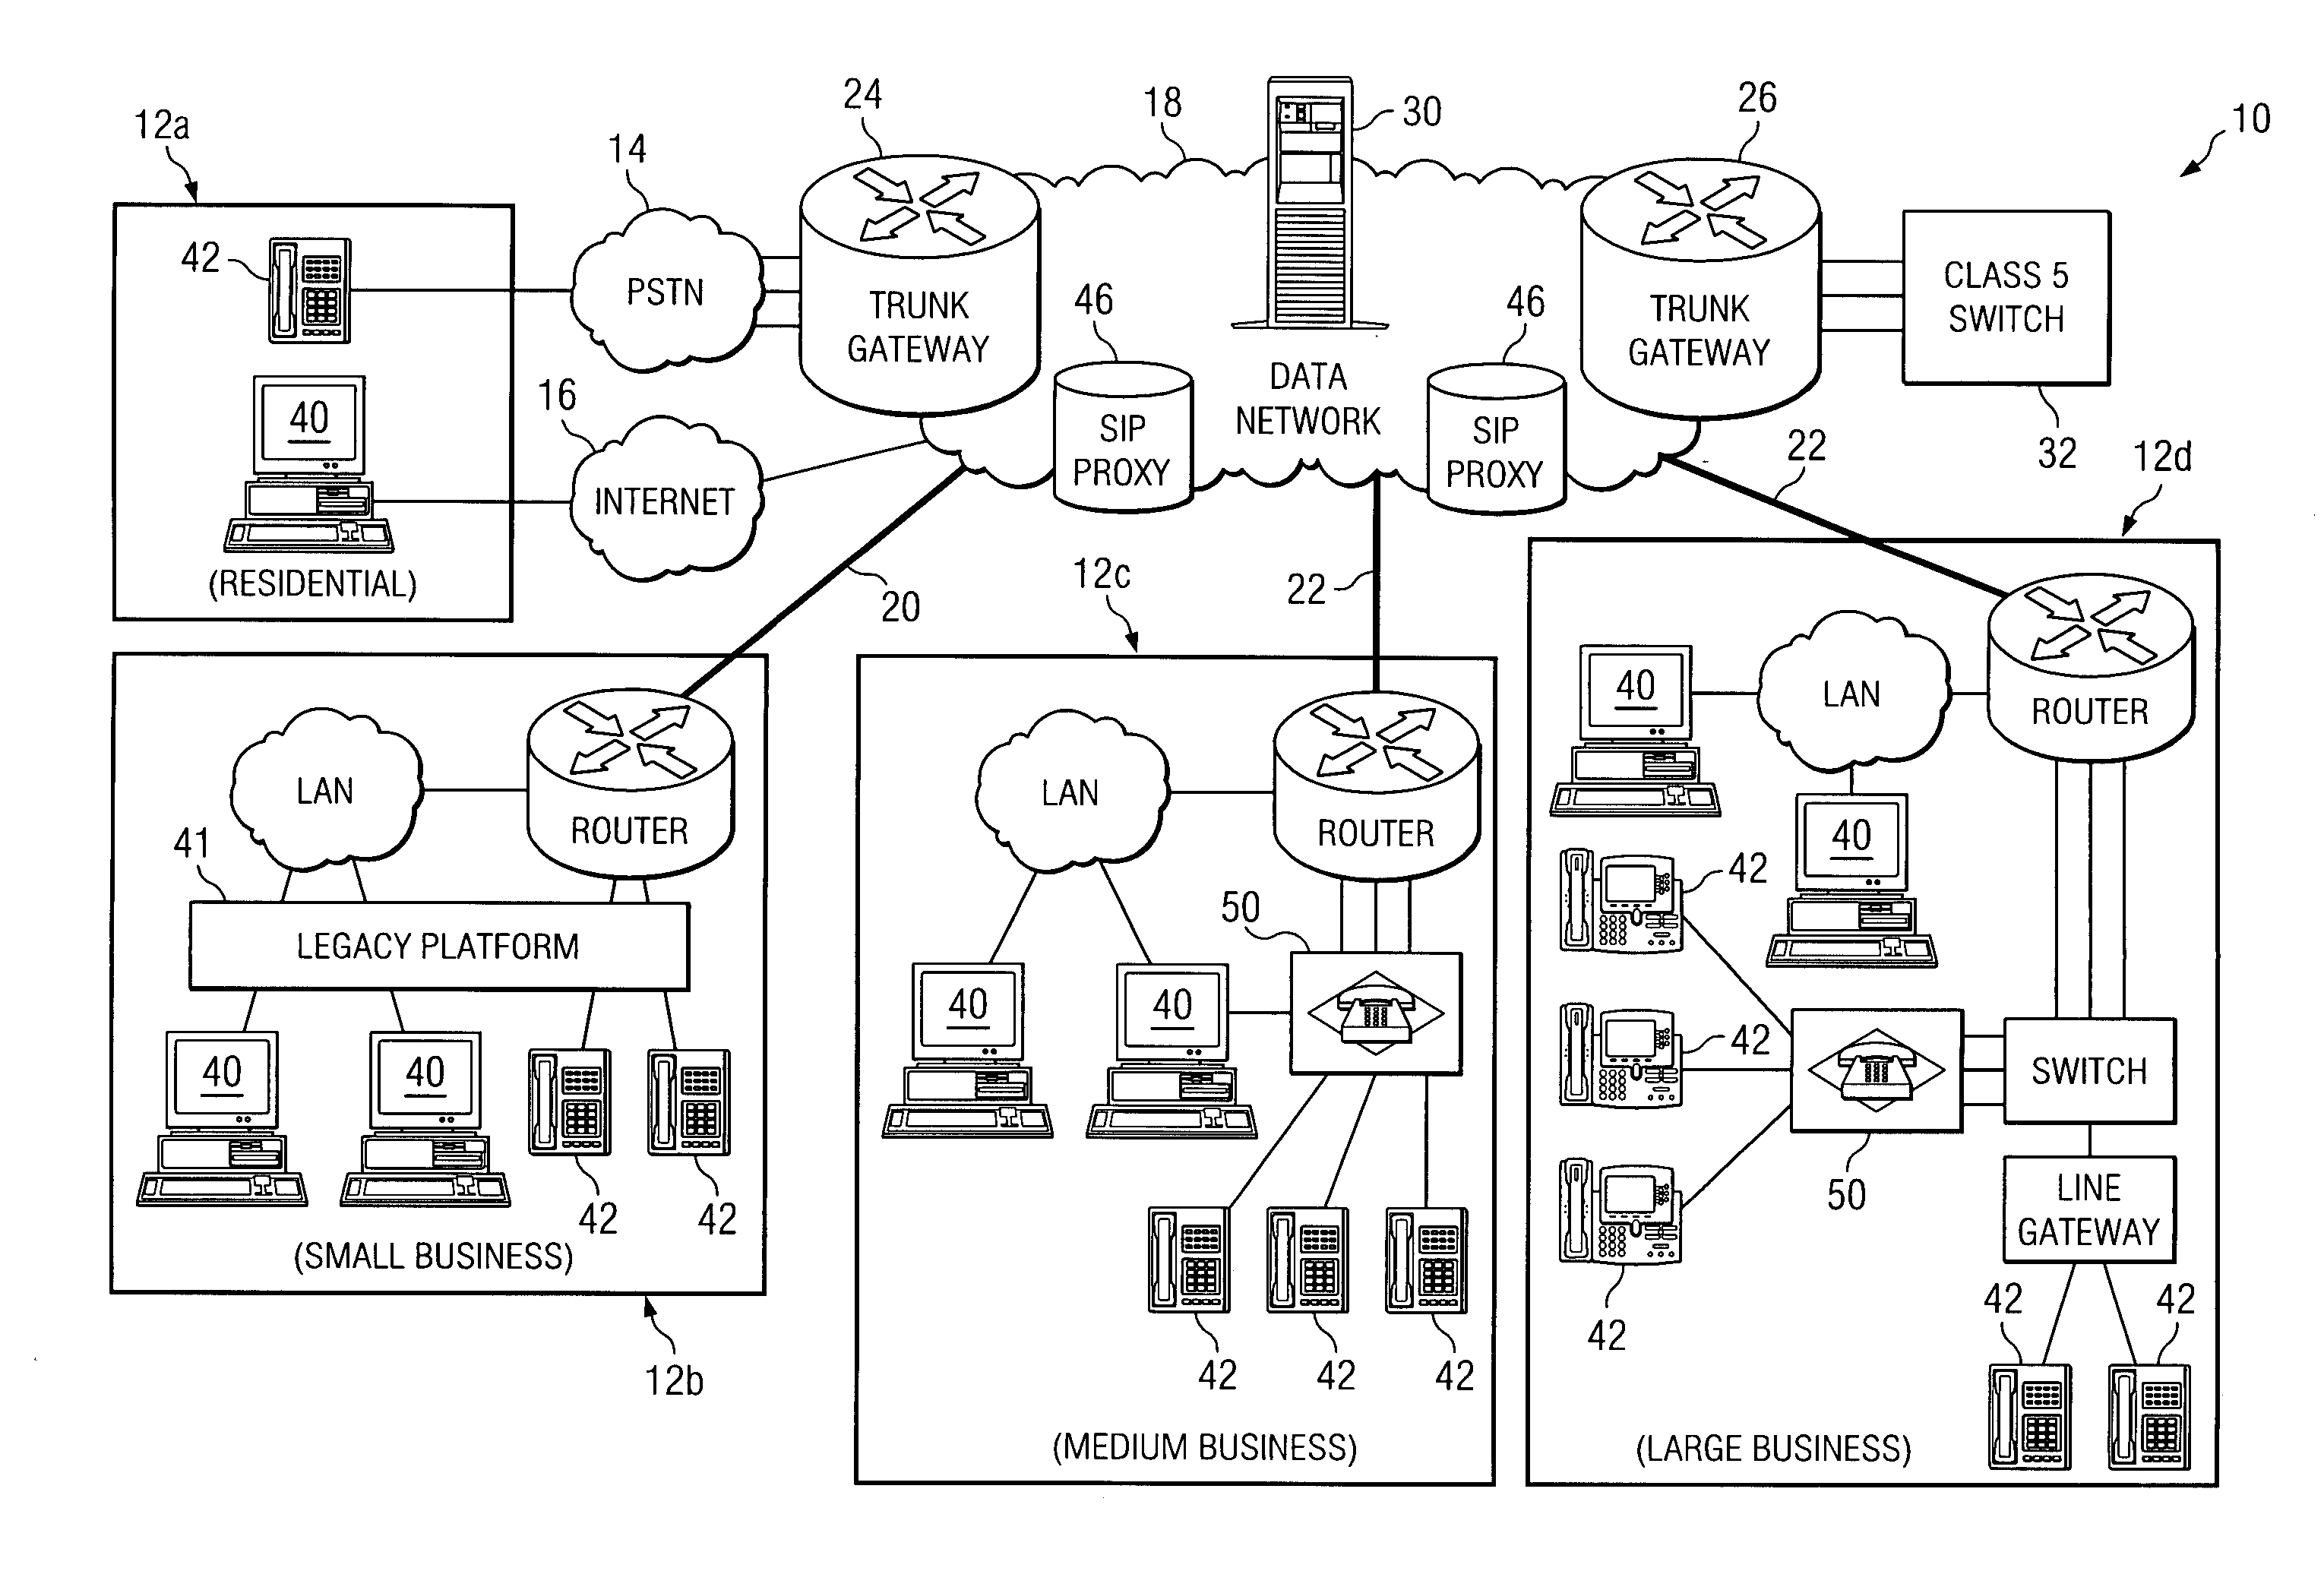 System and method for providing status notification for conventional telephony devices in a session initiation protocol environment